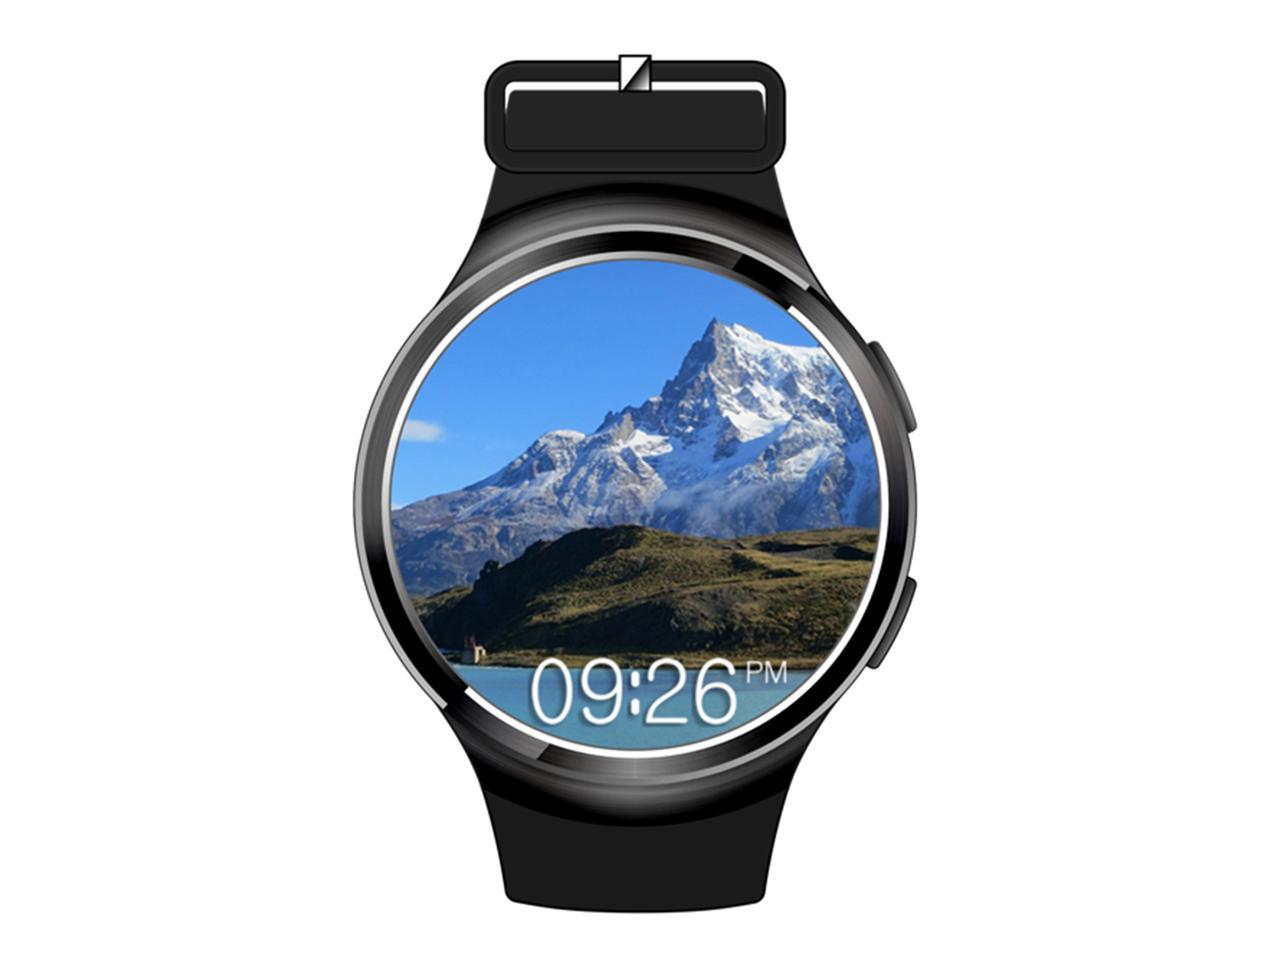 X3 Plus Smart Watch 1.3 inch IPS Screen Android 5.1 MTK6580 Quad Core